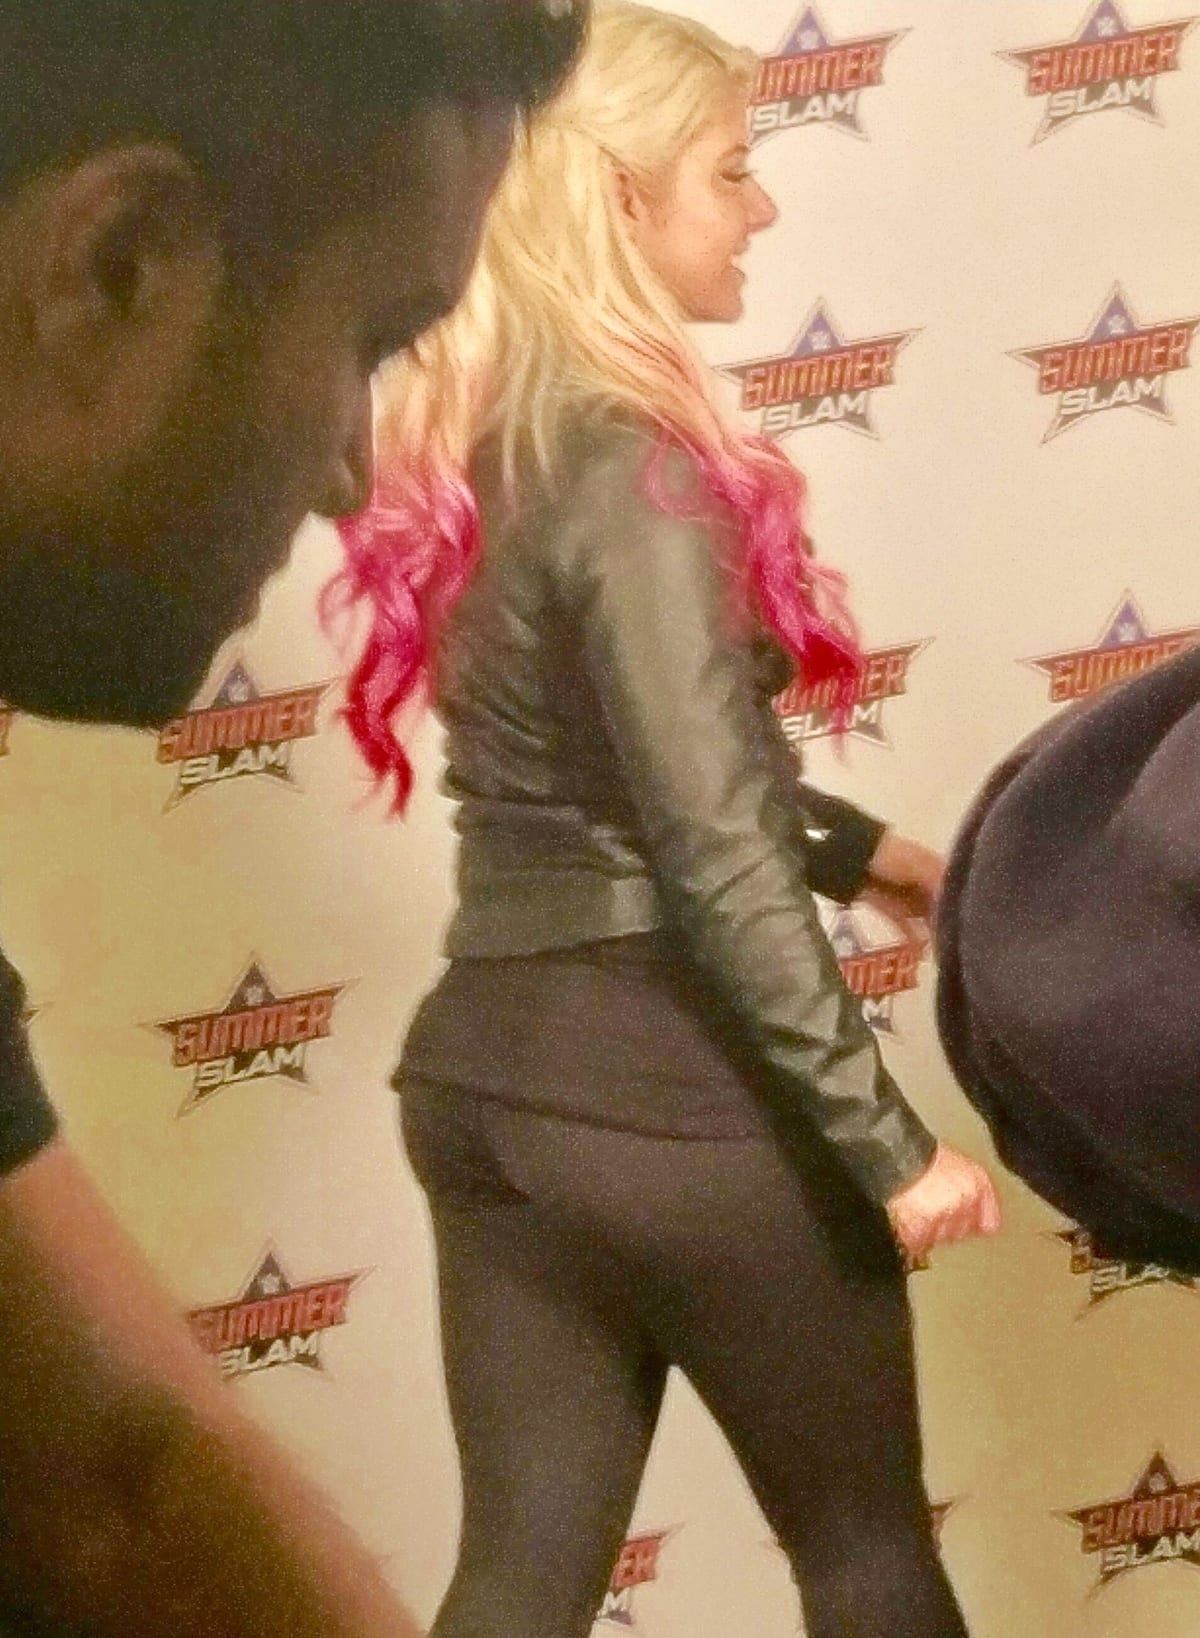 Check Out 11 Photos Of Alexa Bliss Biscuit Butt 